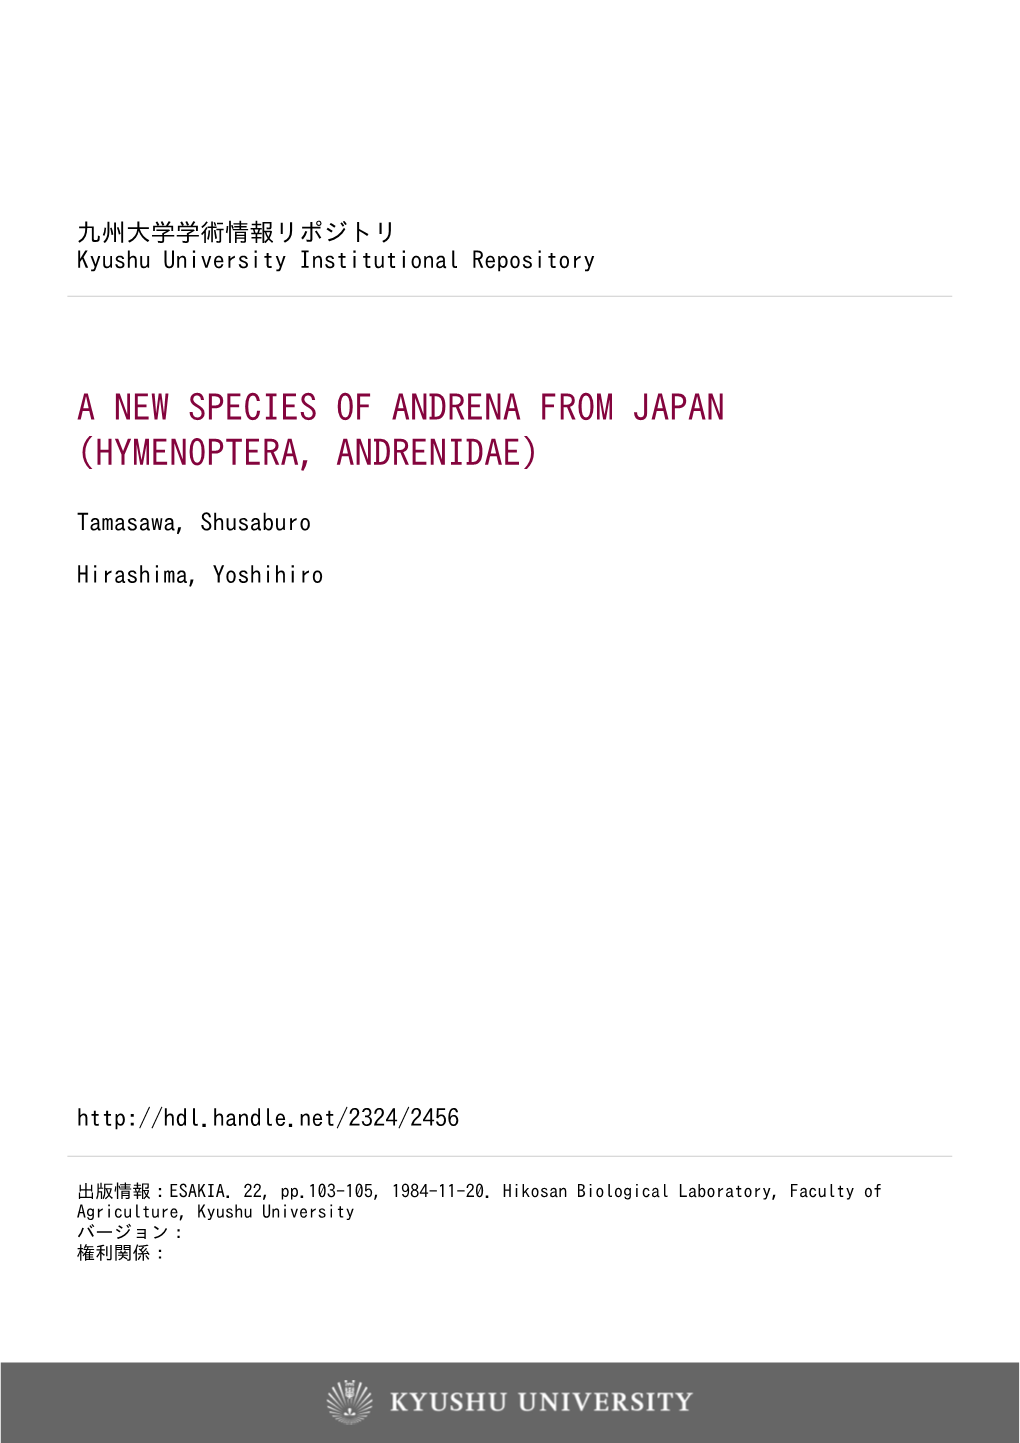 A New Species of Andrena from Japan (Hymenoptera, Andrenidae)